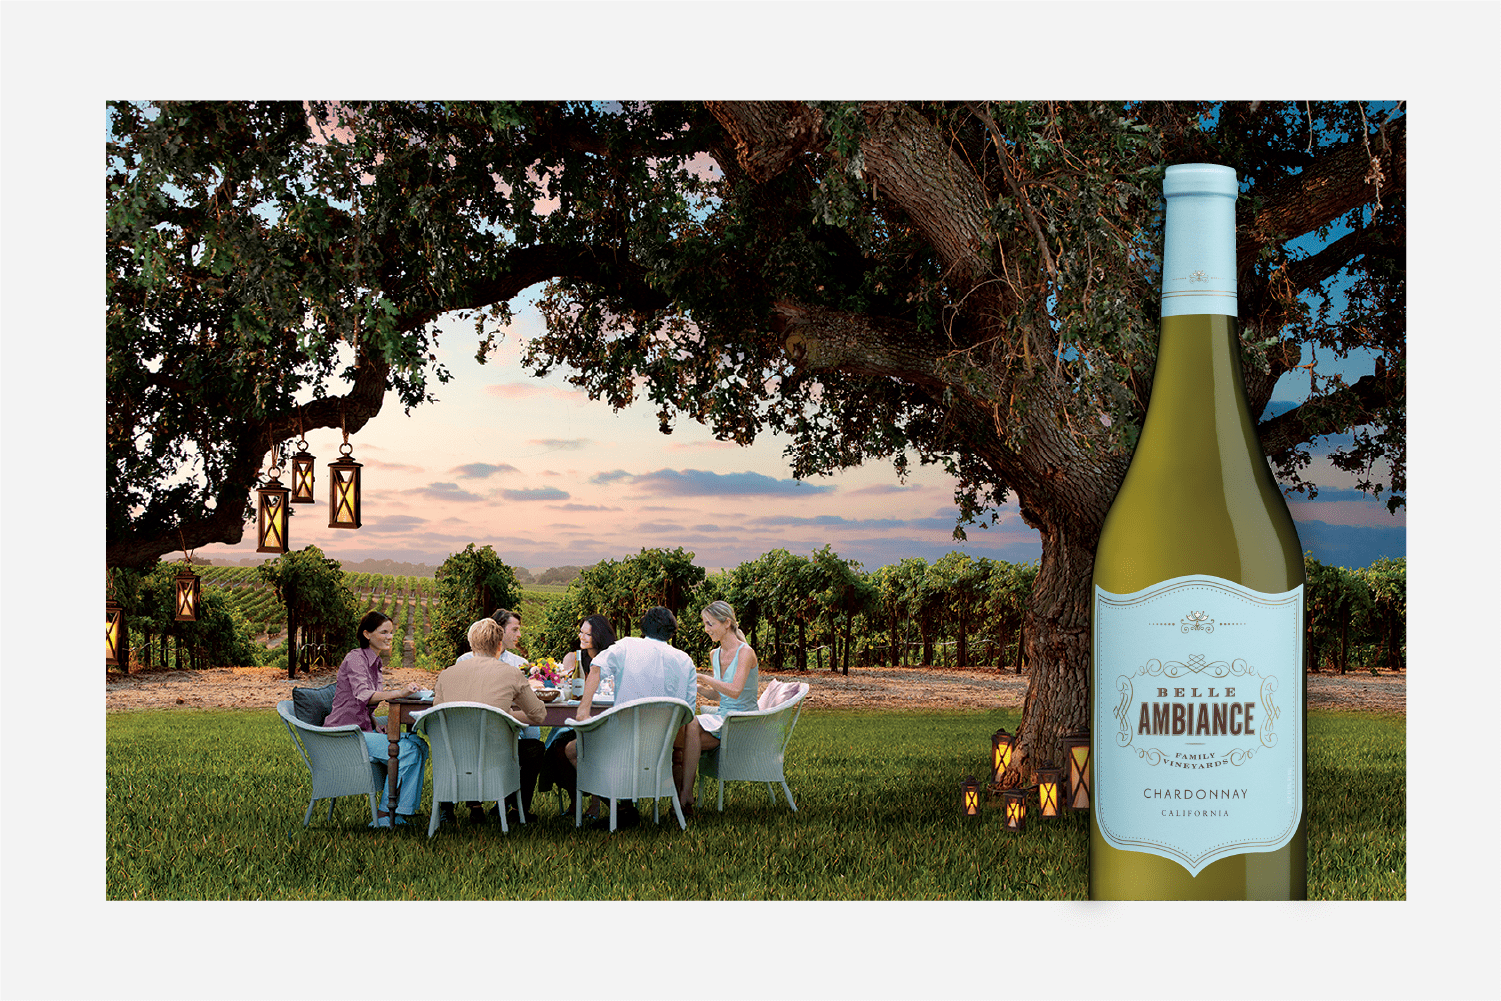 The beautiful vineyard of Belle Ambiance Wines featuring Chardonnay